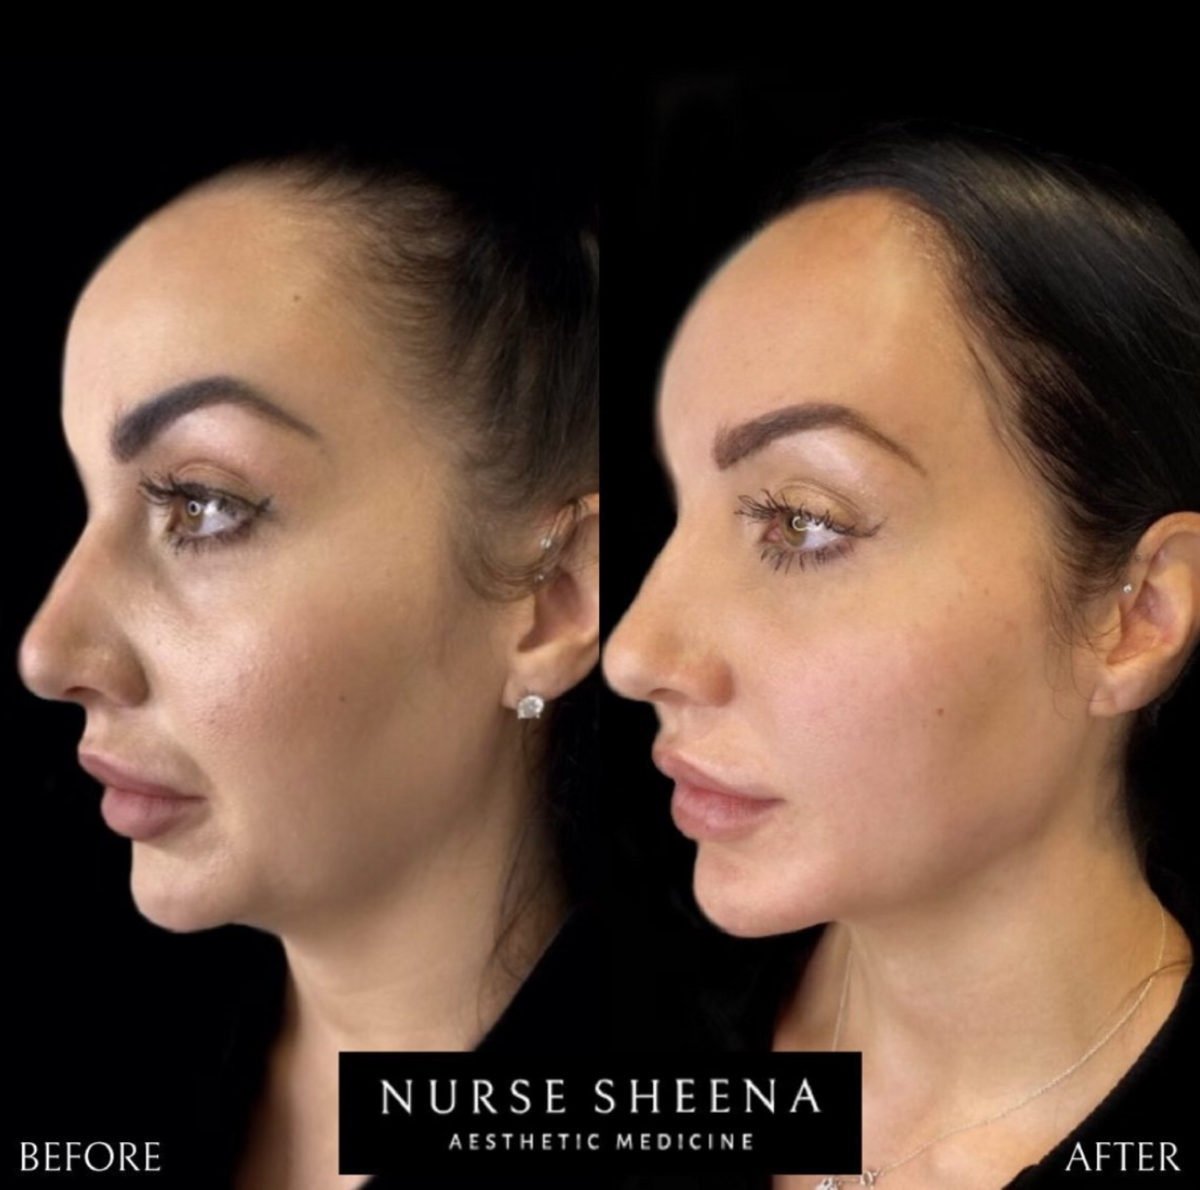 Edmonton Full Face Injections Clients Results by Nurse Sheena